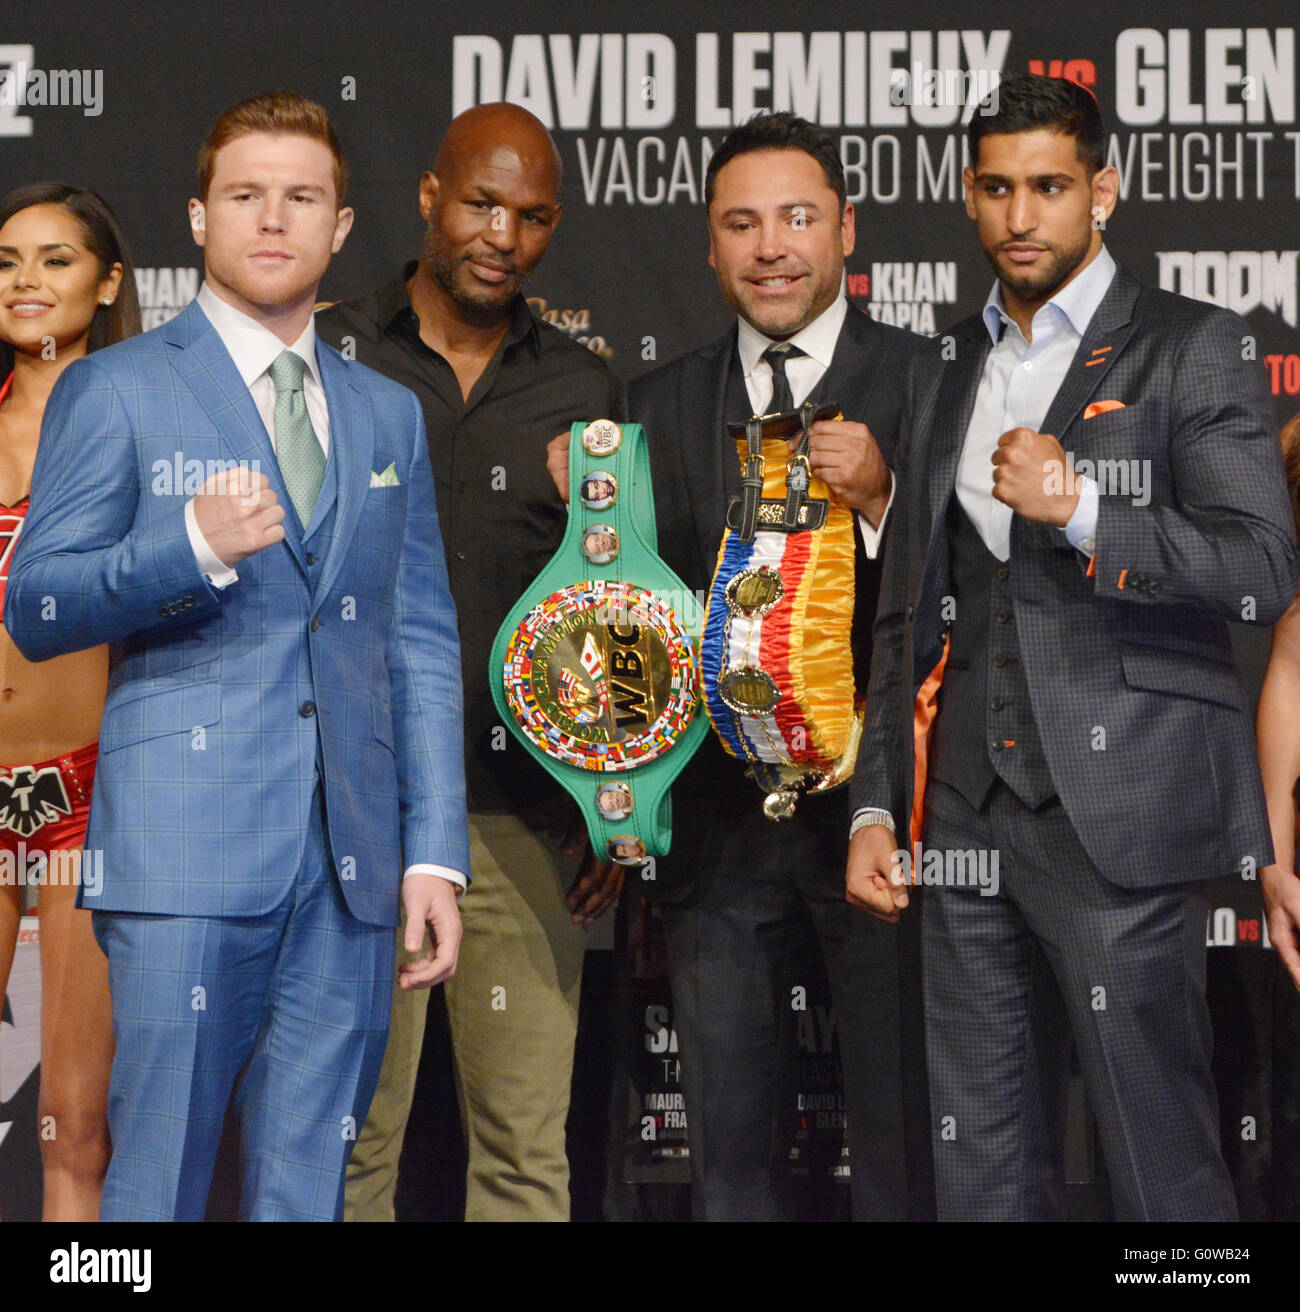 Las Vegas, Nevada, USA. 4th May, 2016. Boxer Canelo Alvarez, Golden Boys Promotions Executives Bernard Hopkins and Oscar De La Hoya and boxer Amir Khan attend the final press conference for the Middleweight Weight Championship fight at The Ka Theater inside MGM Grand Hotel & Casino on May 4, 2016, in Las Vegas, Nevada. Credit:  Marcel Thomas/ZUMA Wire/Alamy Live News Stock Photo